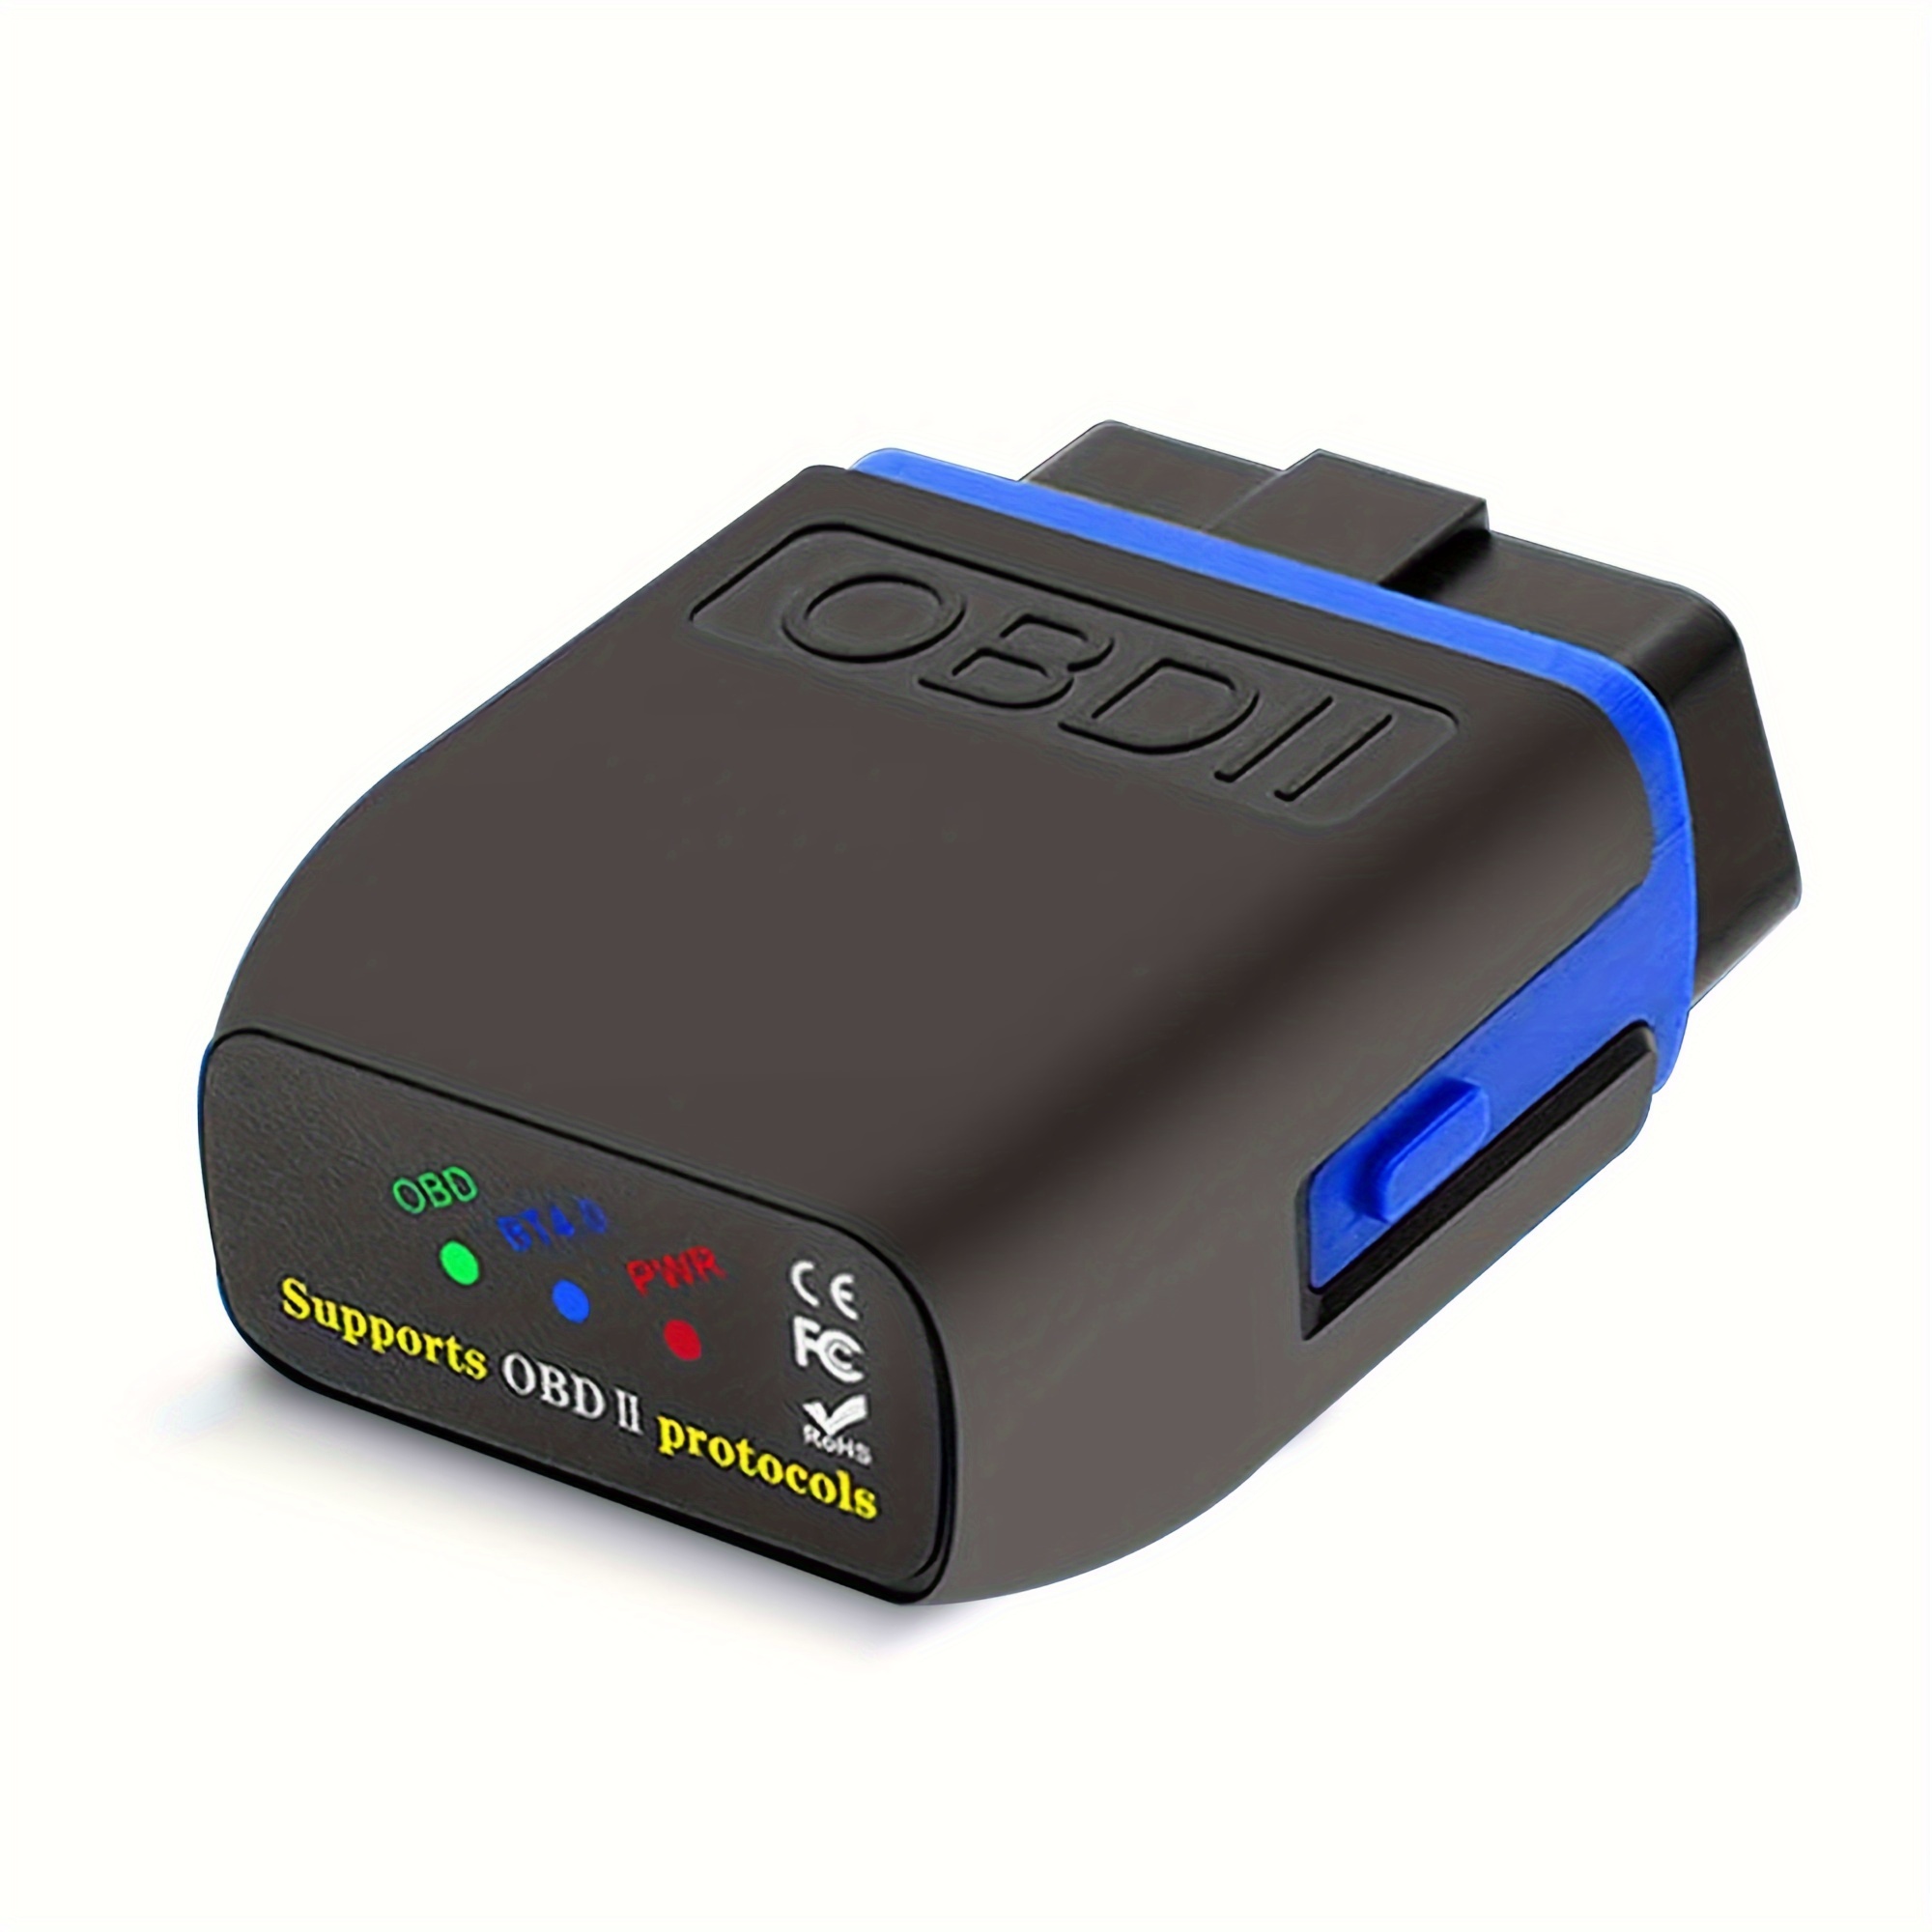 FIXD Bluetooth OBD2 Scanner - Car Code Reader & Diagnostic Tool for iPhone,  Android - Check Engine Data, Maintenance Alerts, Live Vehicle Health